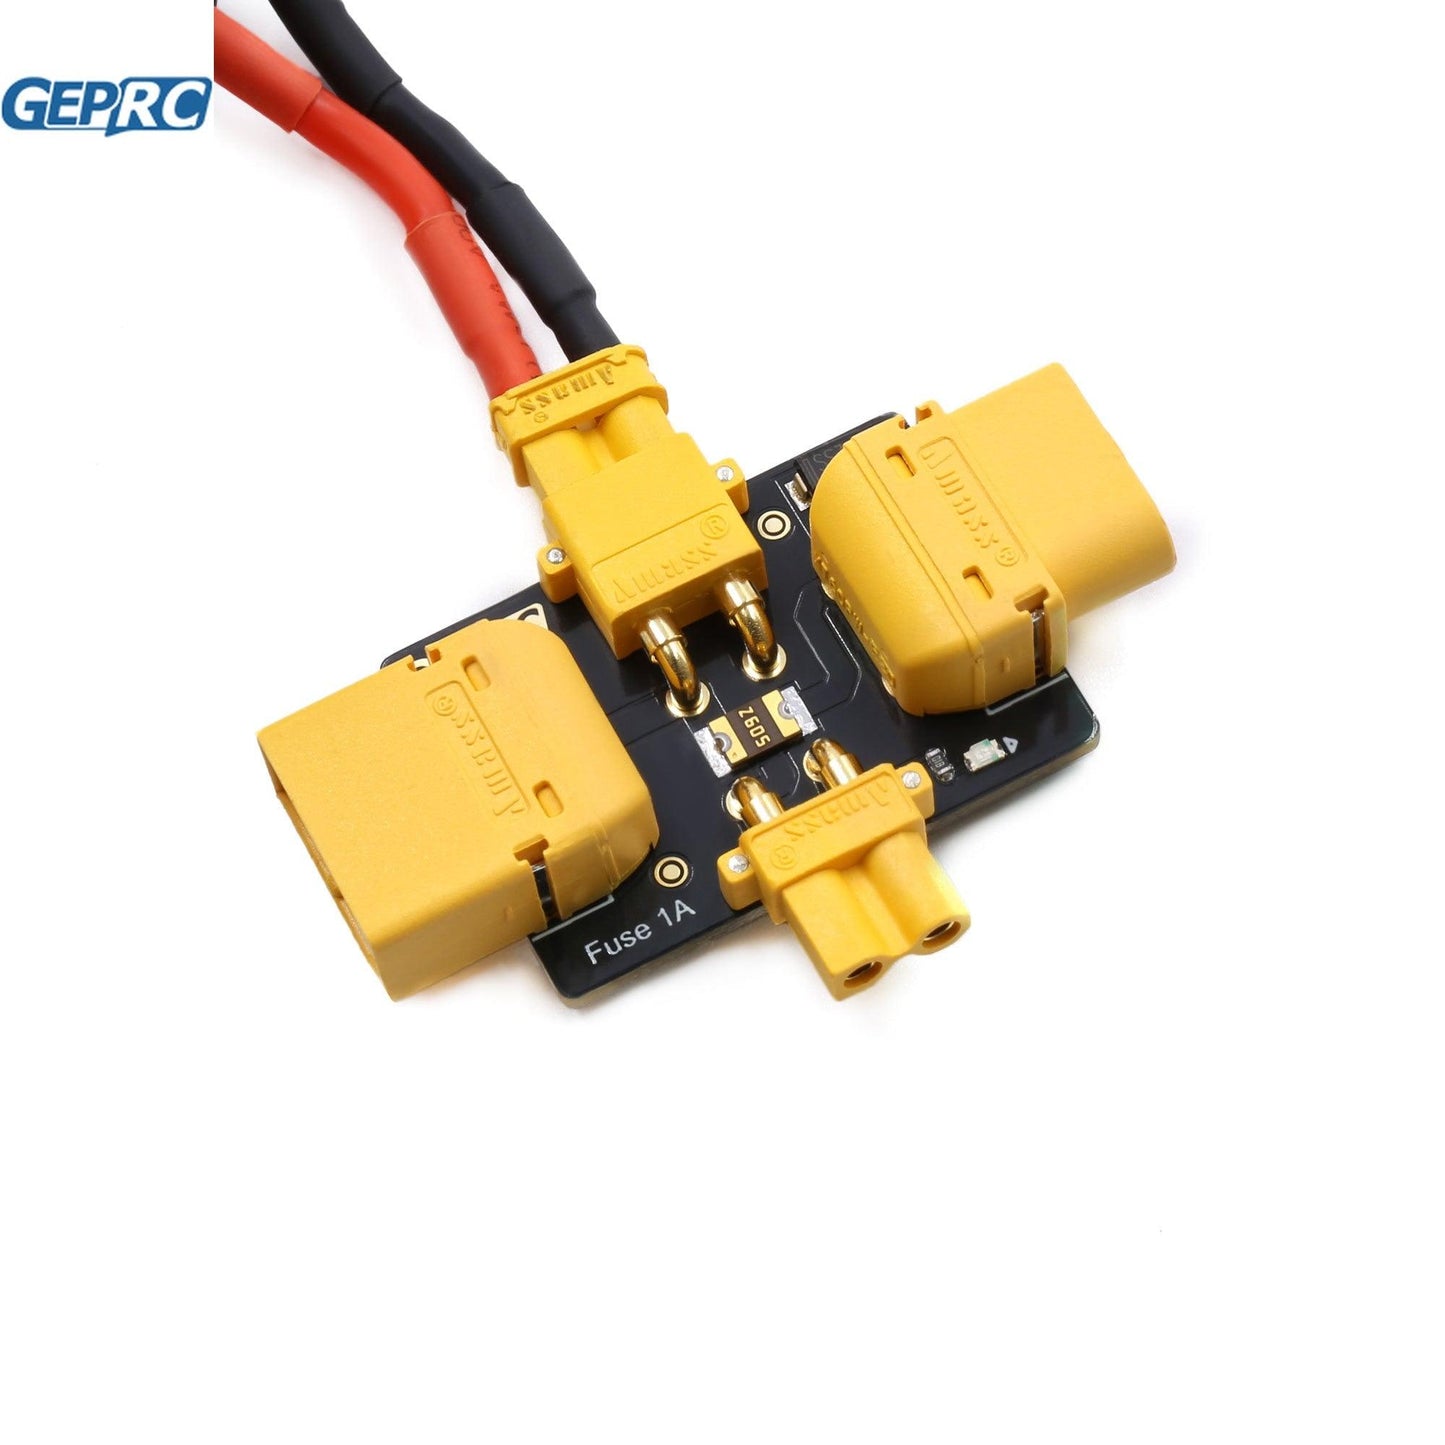 GEPRC Smoke Stopper XT30 & XT60 Connector - Universal Alarm Suitable For Most Drones For DIY RC FPV Quadcopter Accessories Parts - RCDrone